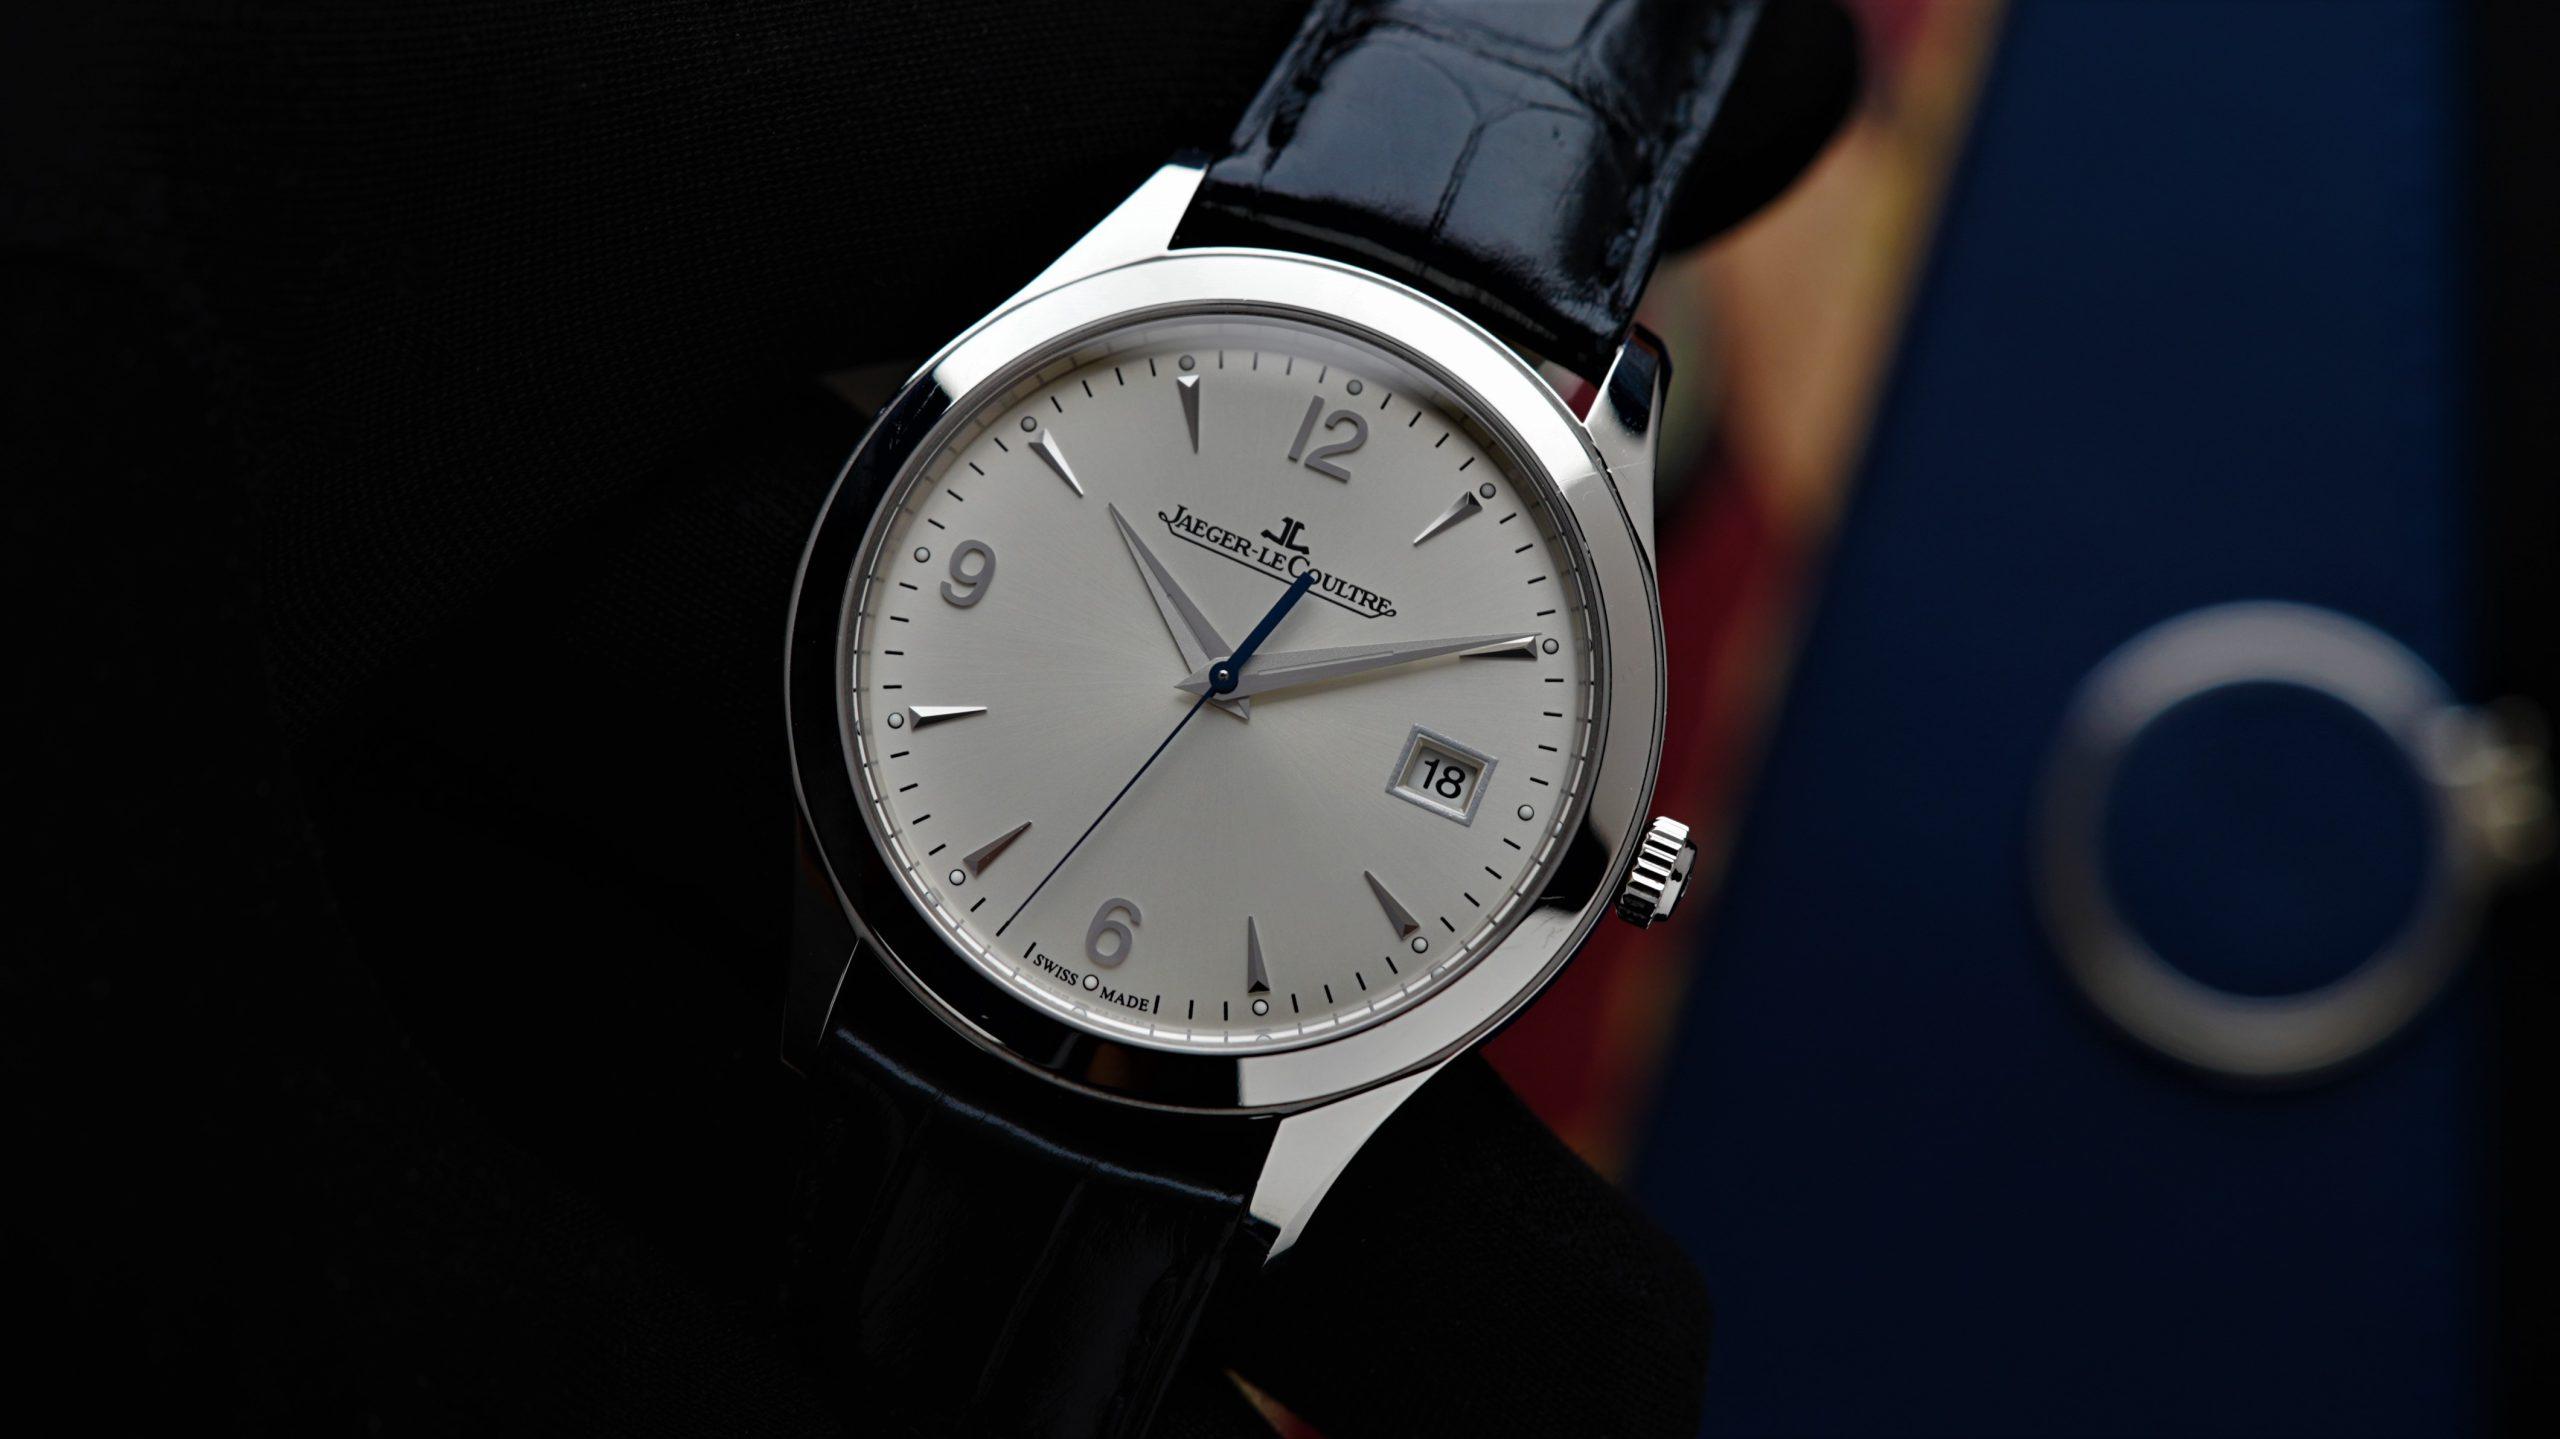 Jaeger-LeCoultre Master Control Date watch close up picture of dial.